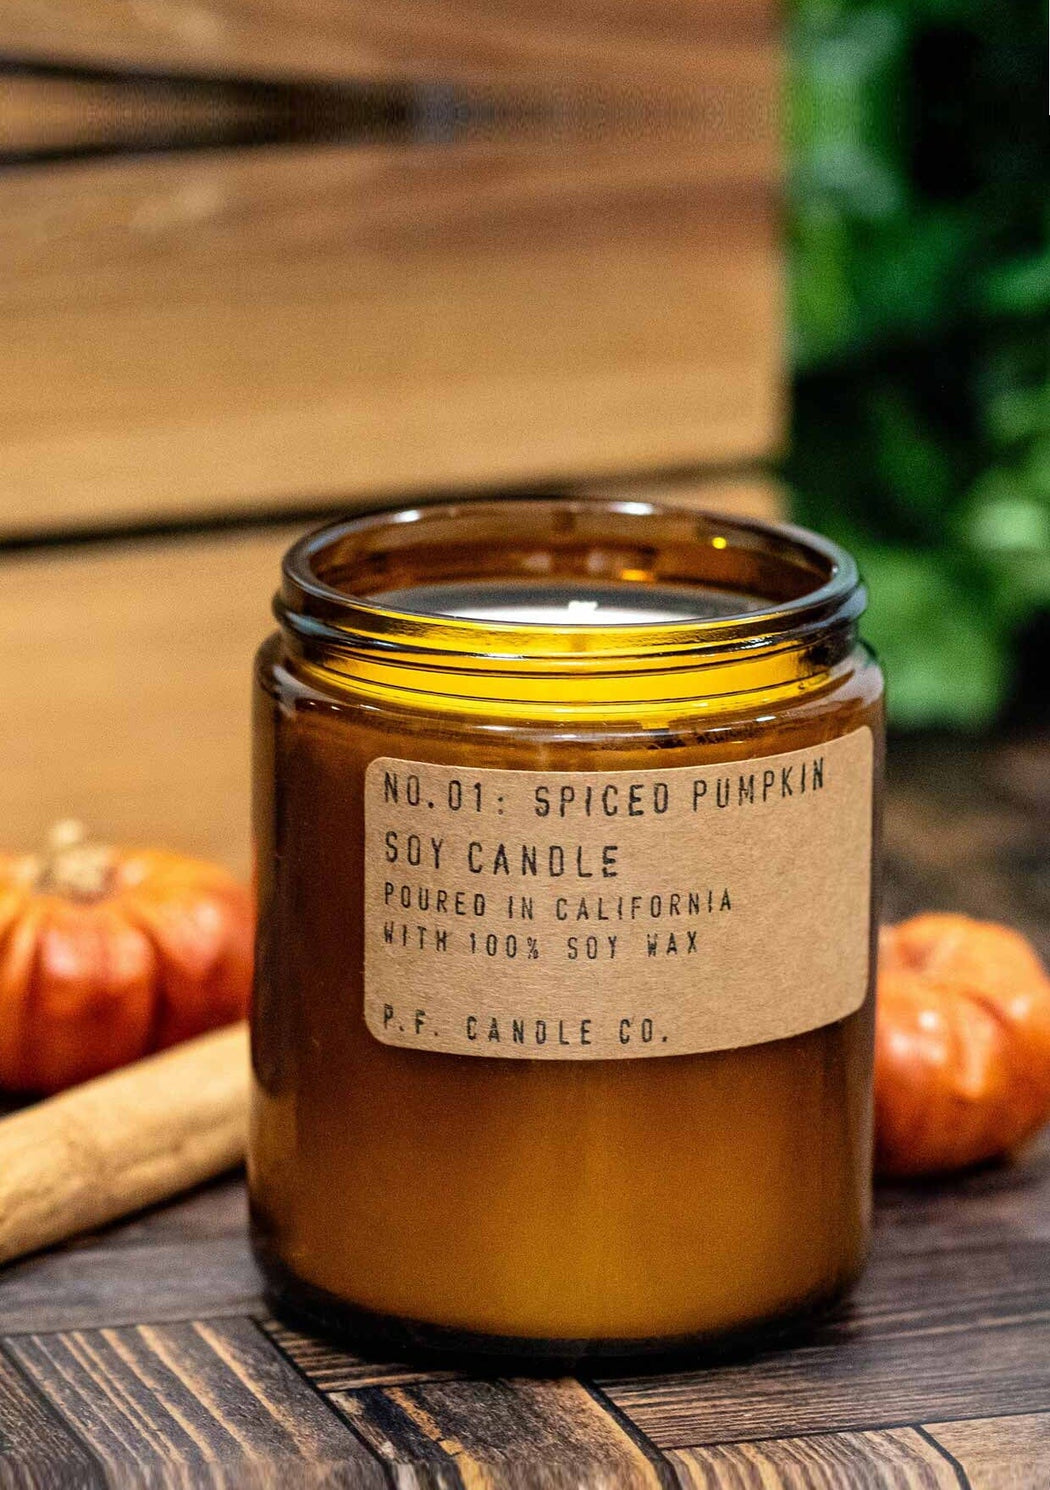 STANDARD CANDLE by P.F. CANDLE CO.